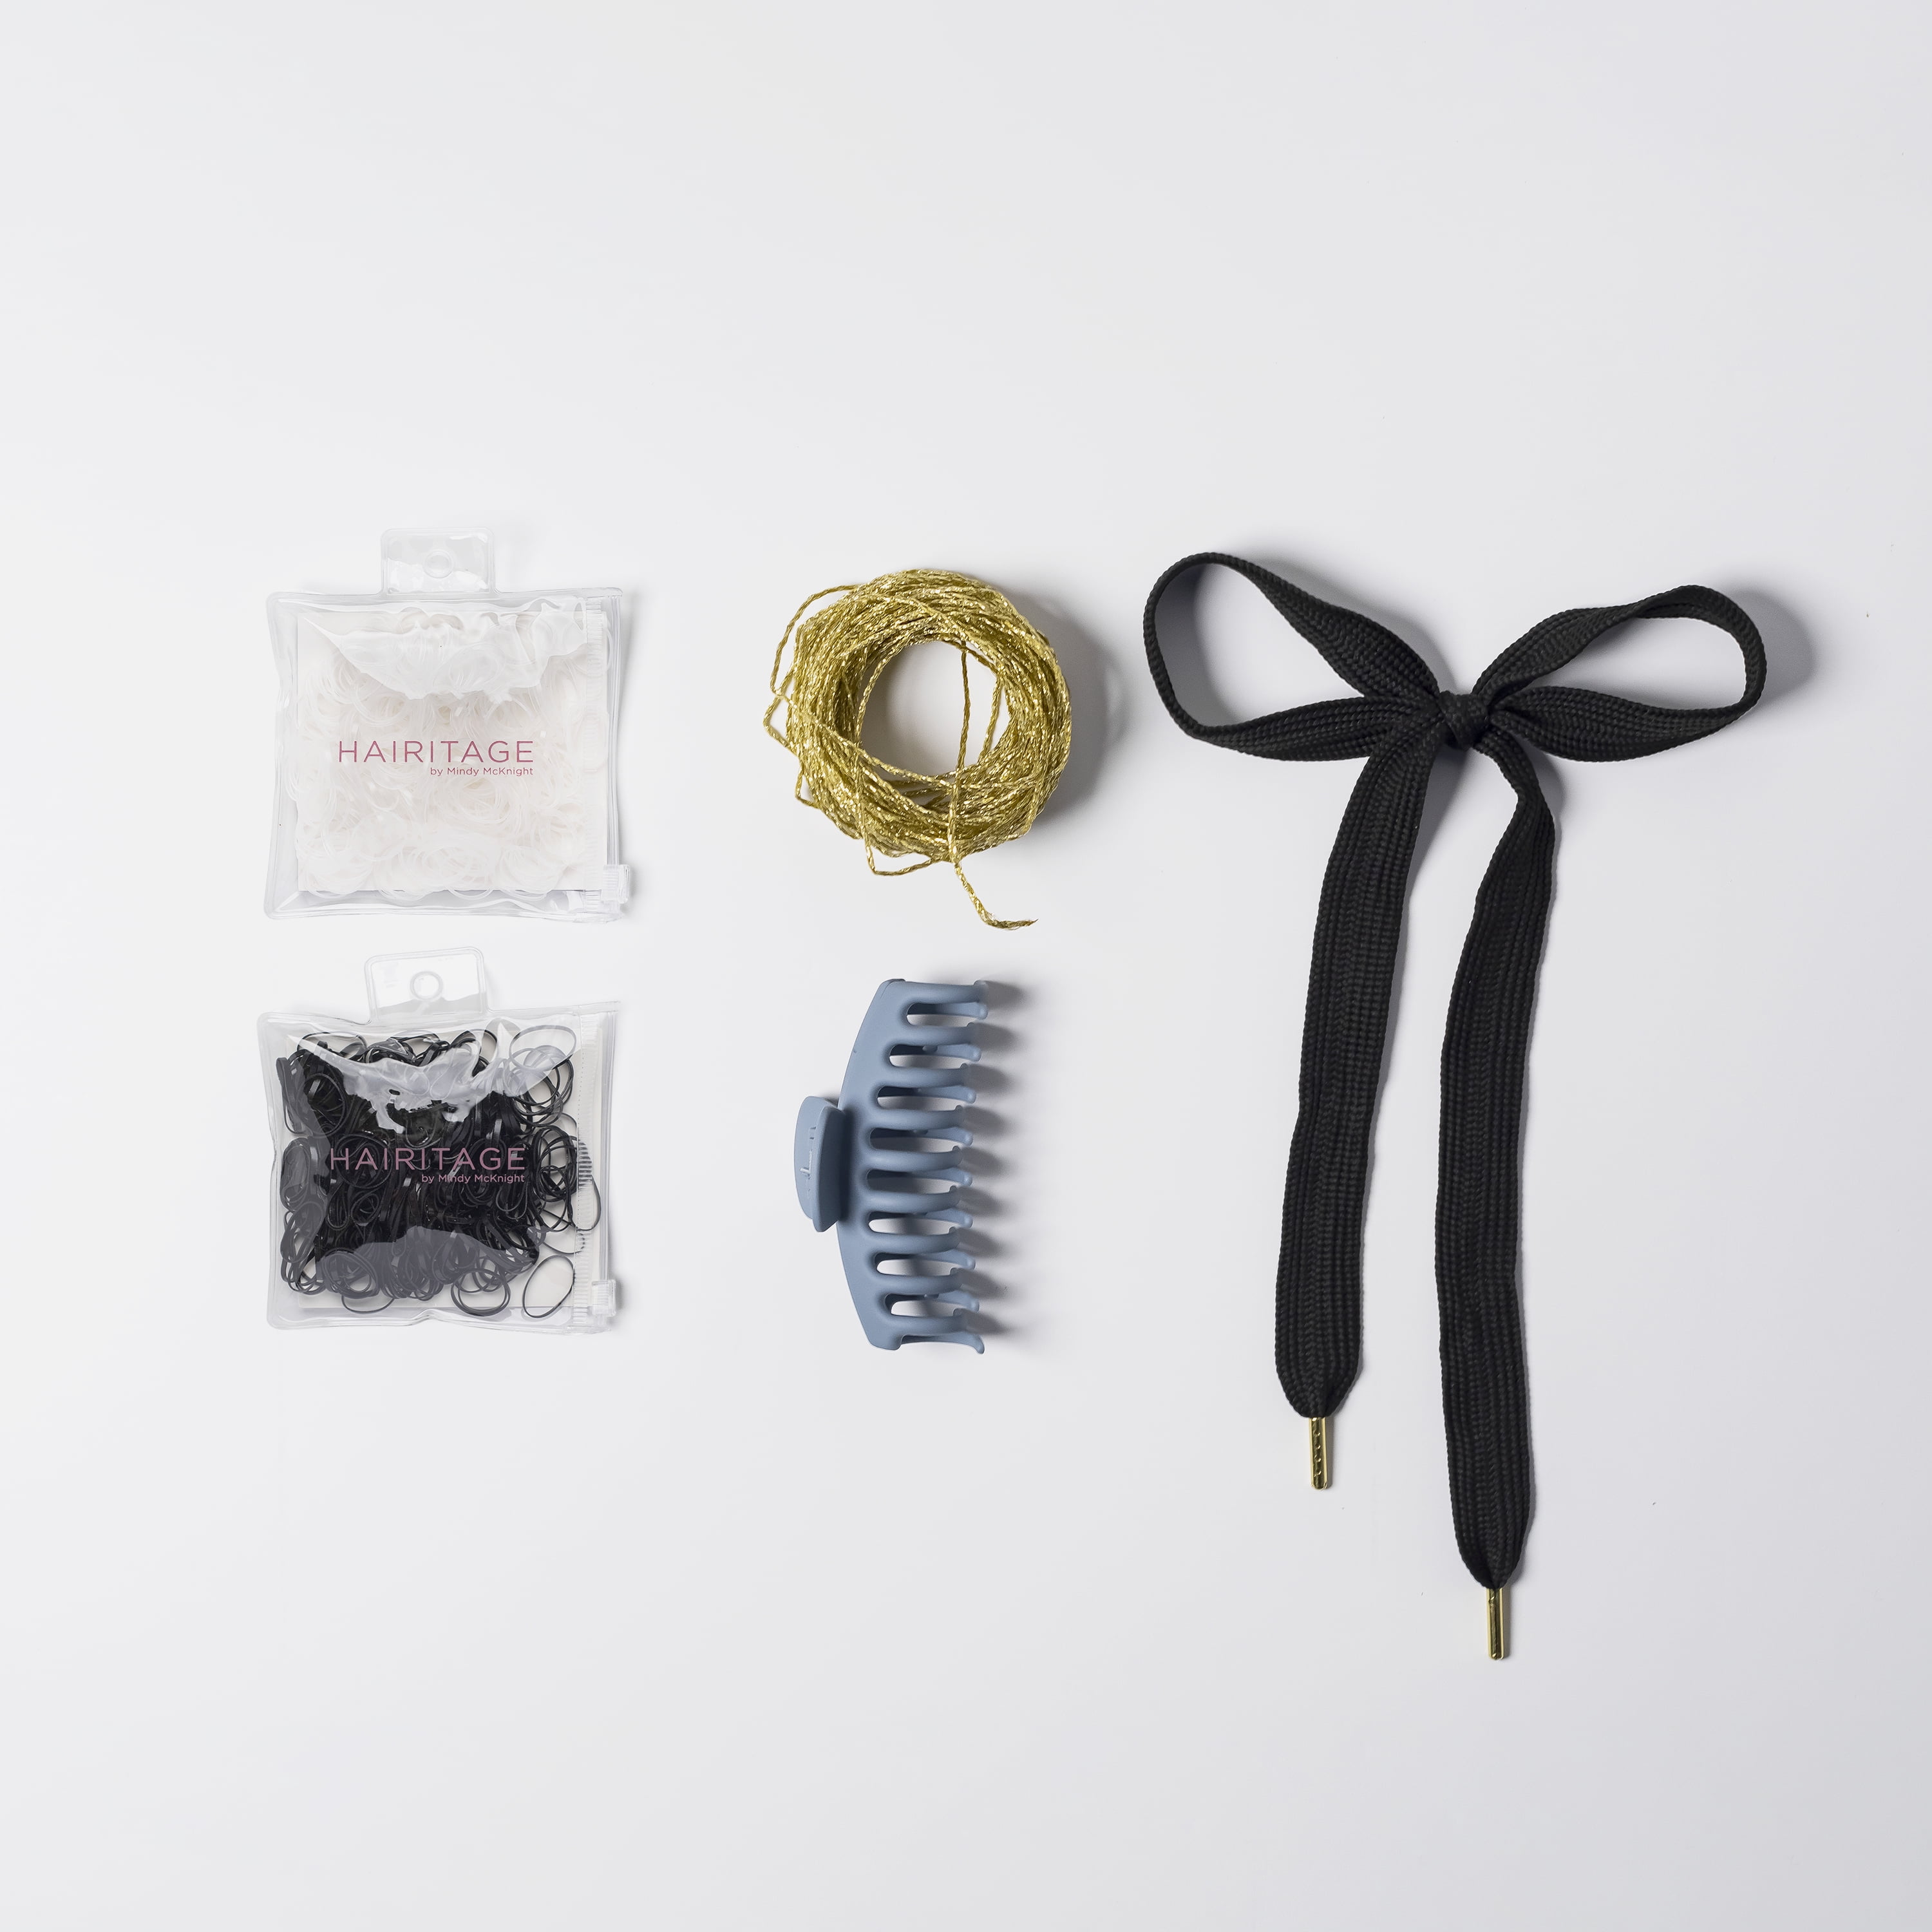 Better Together Hair Tie Holder + Hair Ties – Hairitage by Mindy